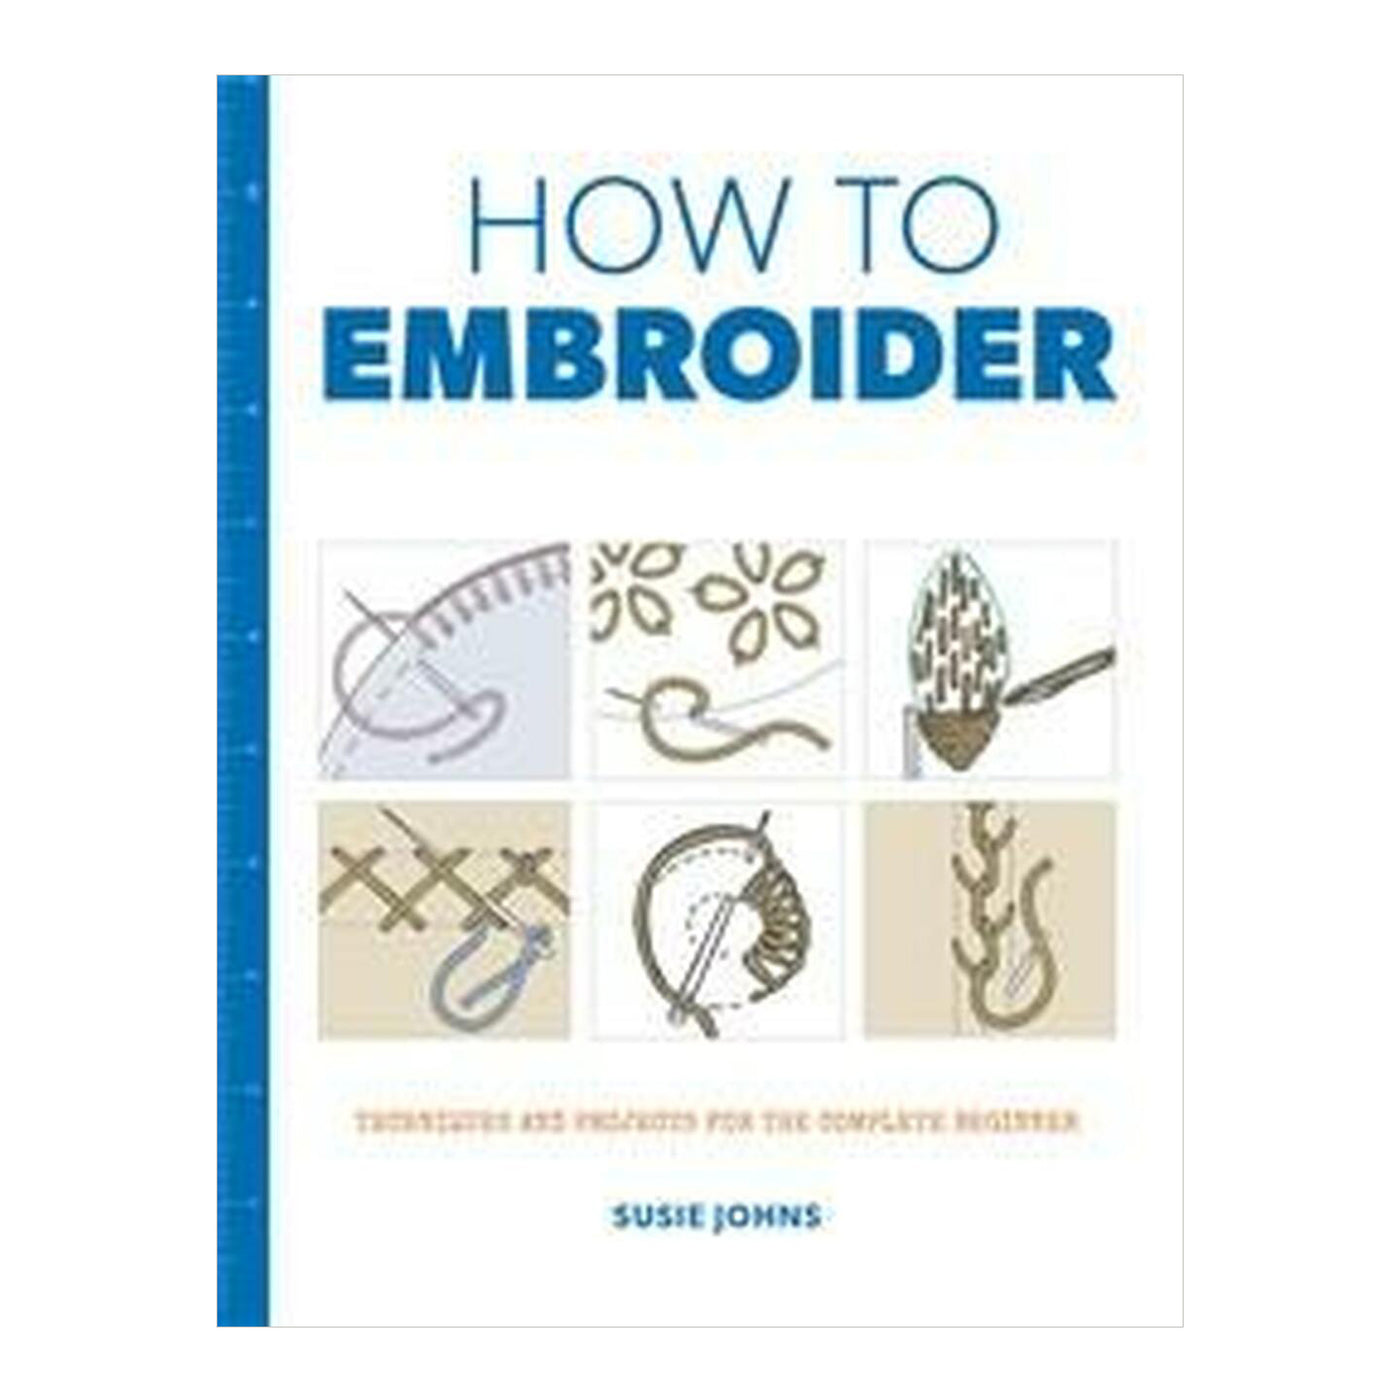 How to Embroider (Susie Johns)